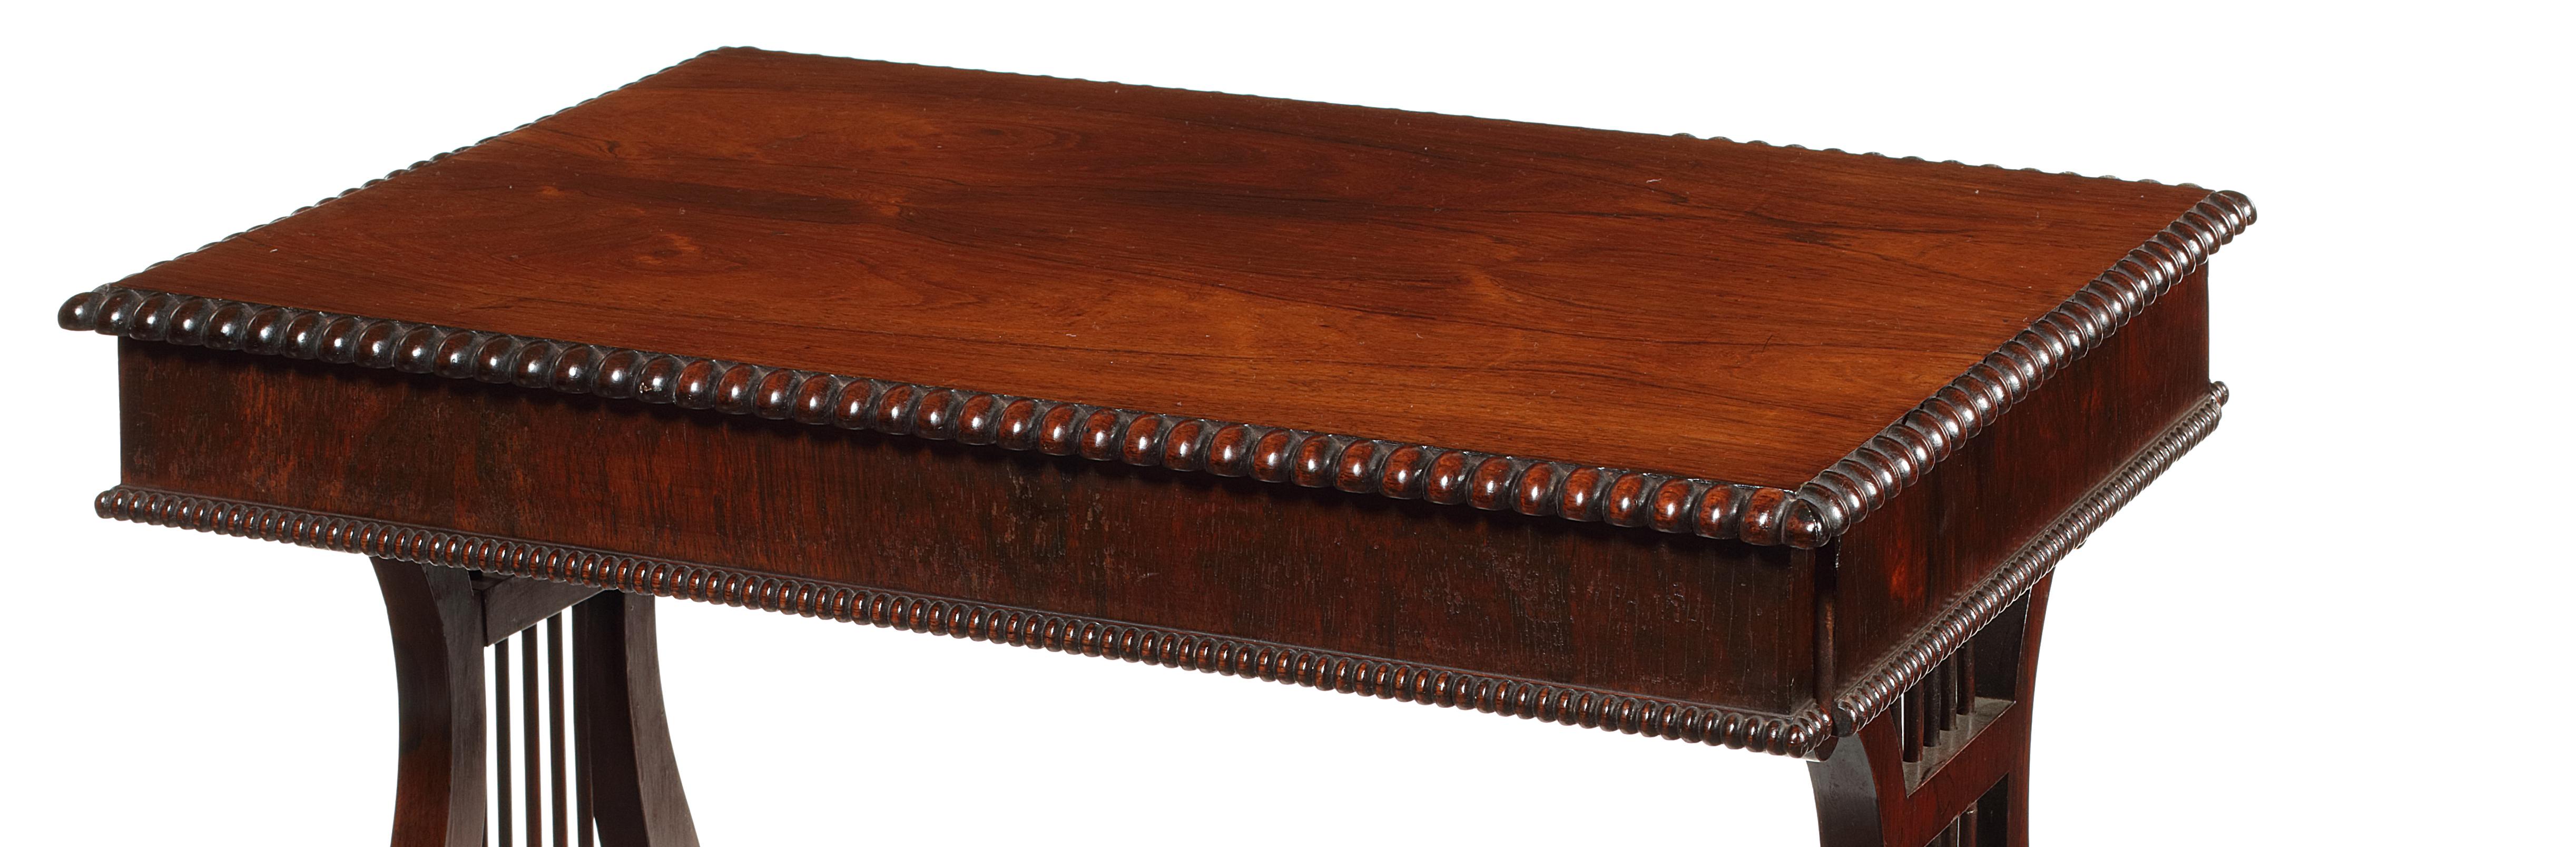 The rectangular top with beaded edge above two drawers to each side, on spindle turned lyre-end supports, on cabriole leaf carved legs and scroll feet with castors, the sliding frame for a work bag existing, but fixed closed.

With similarities to